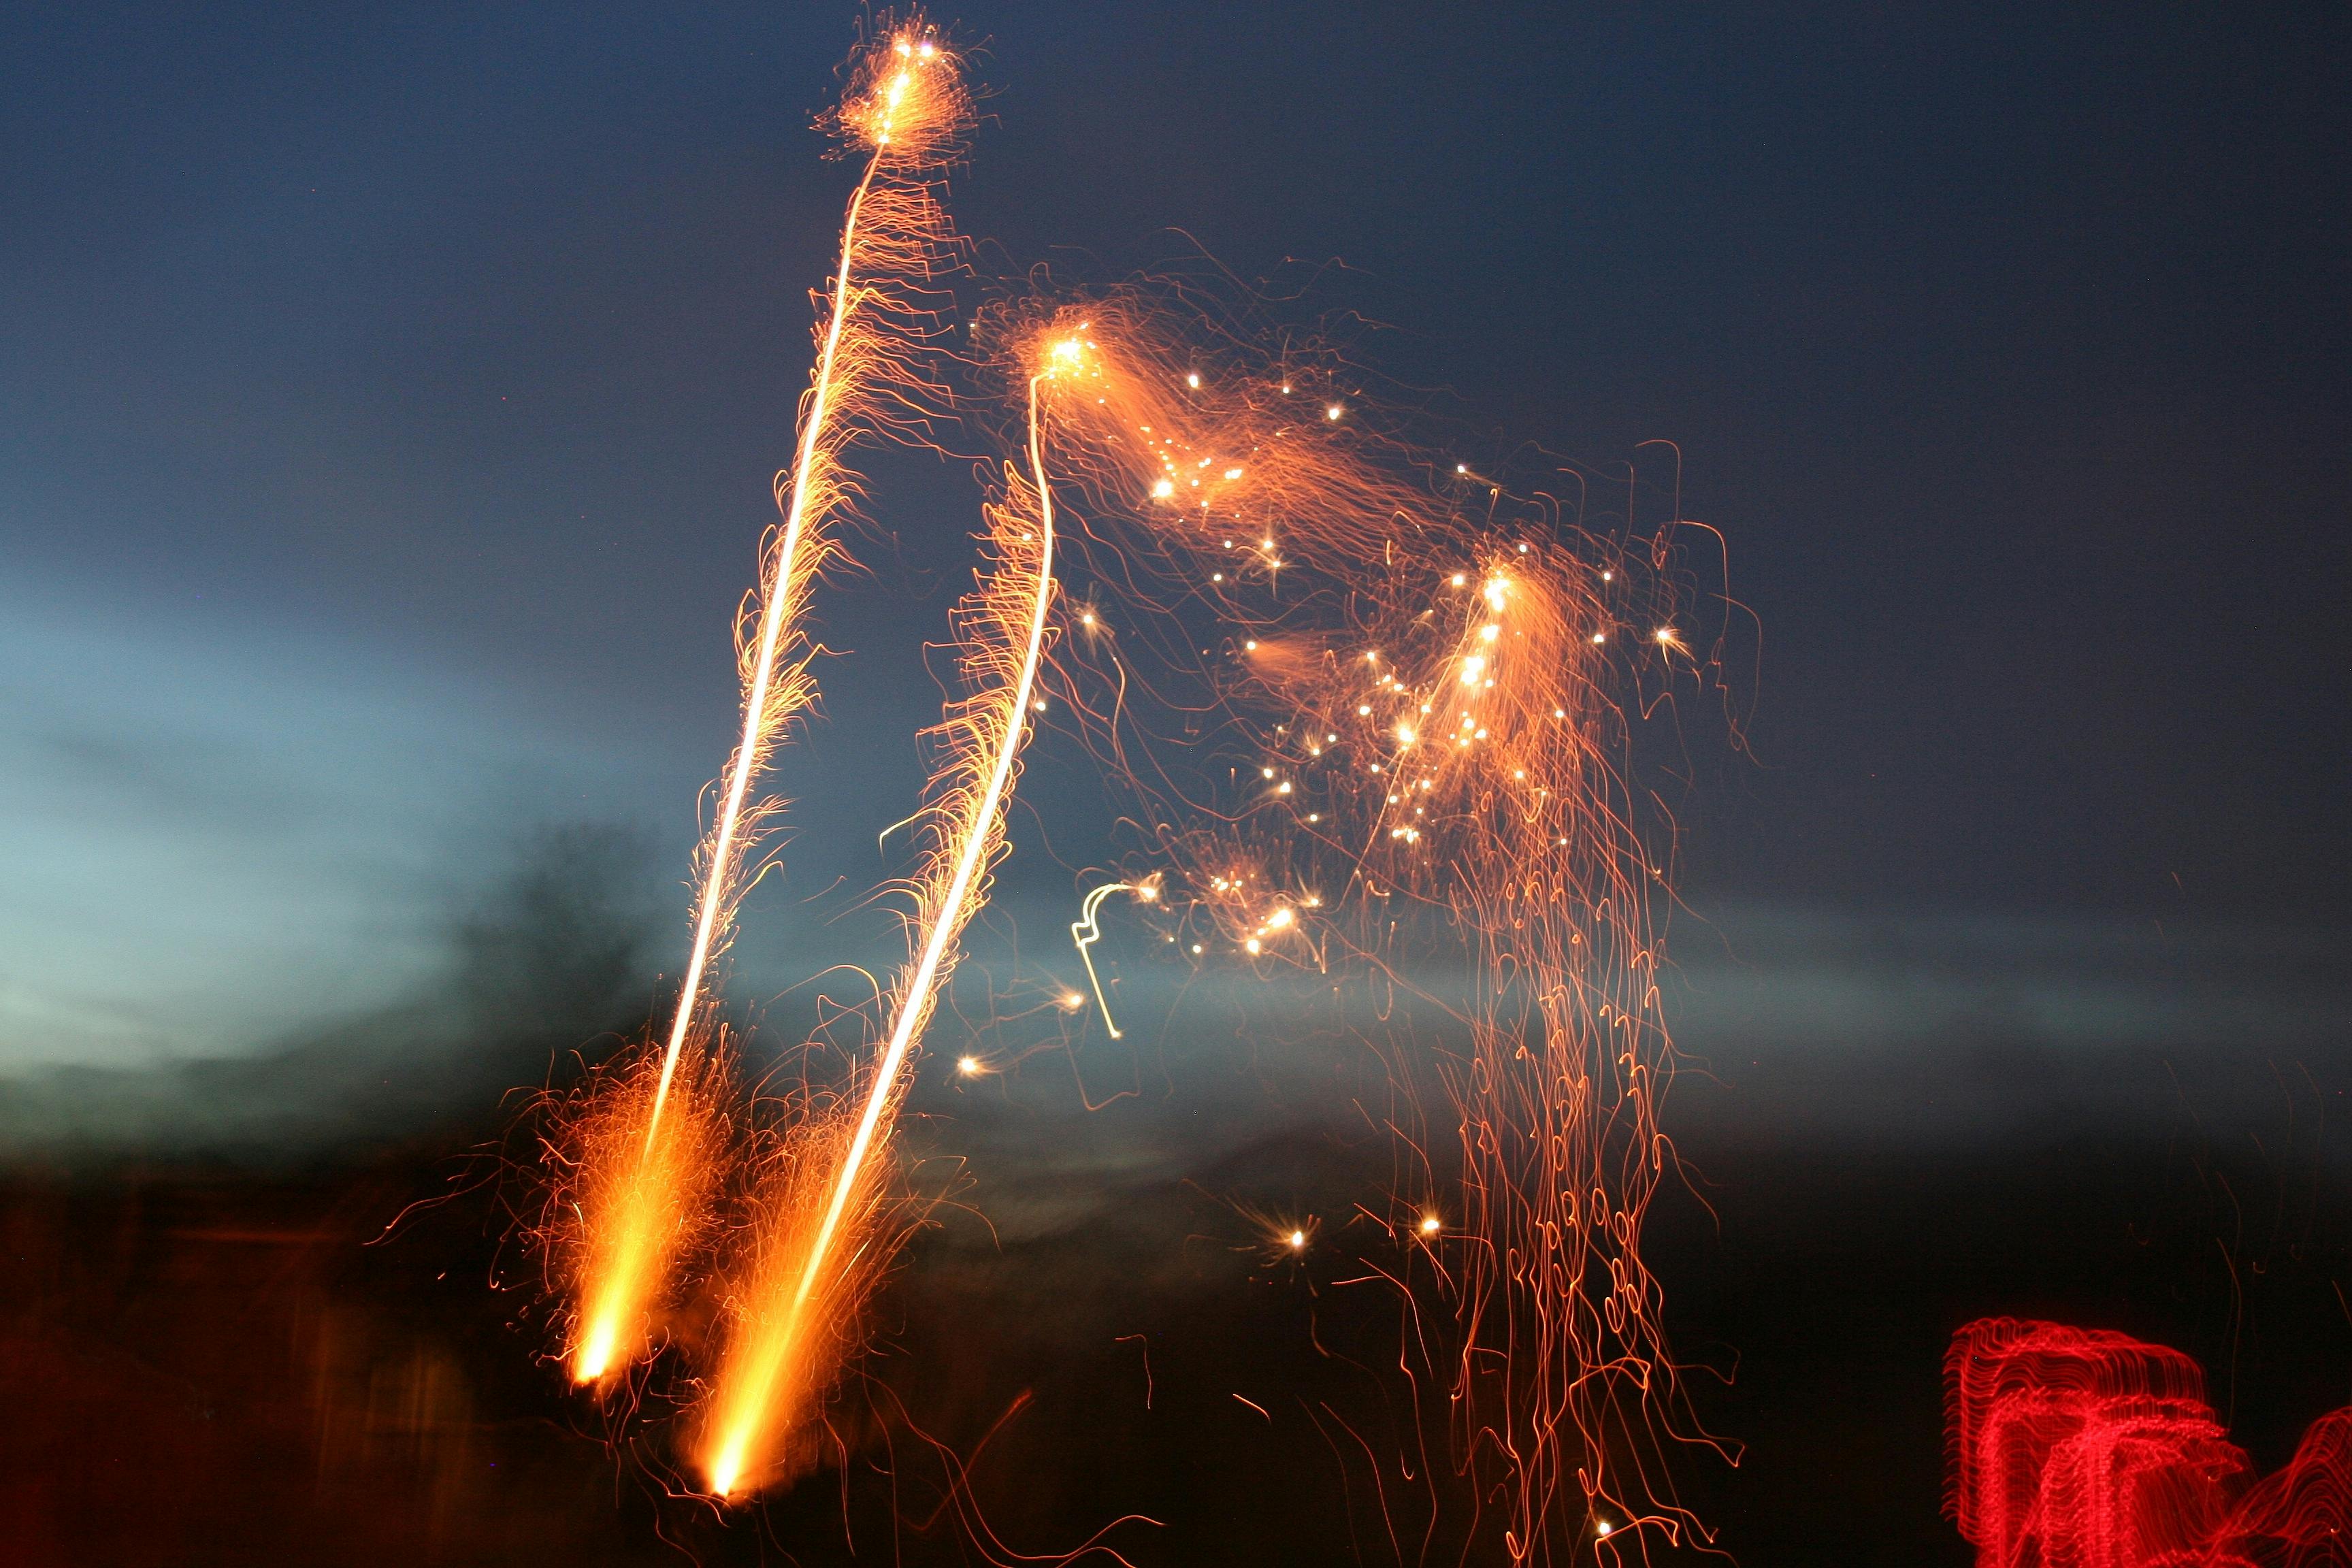 Free stock photo of 4th of July fire works, Merlin and the dragons, slow shutter speed